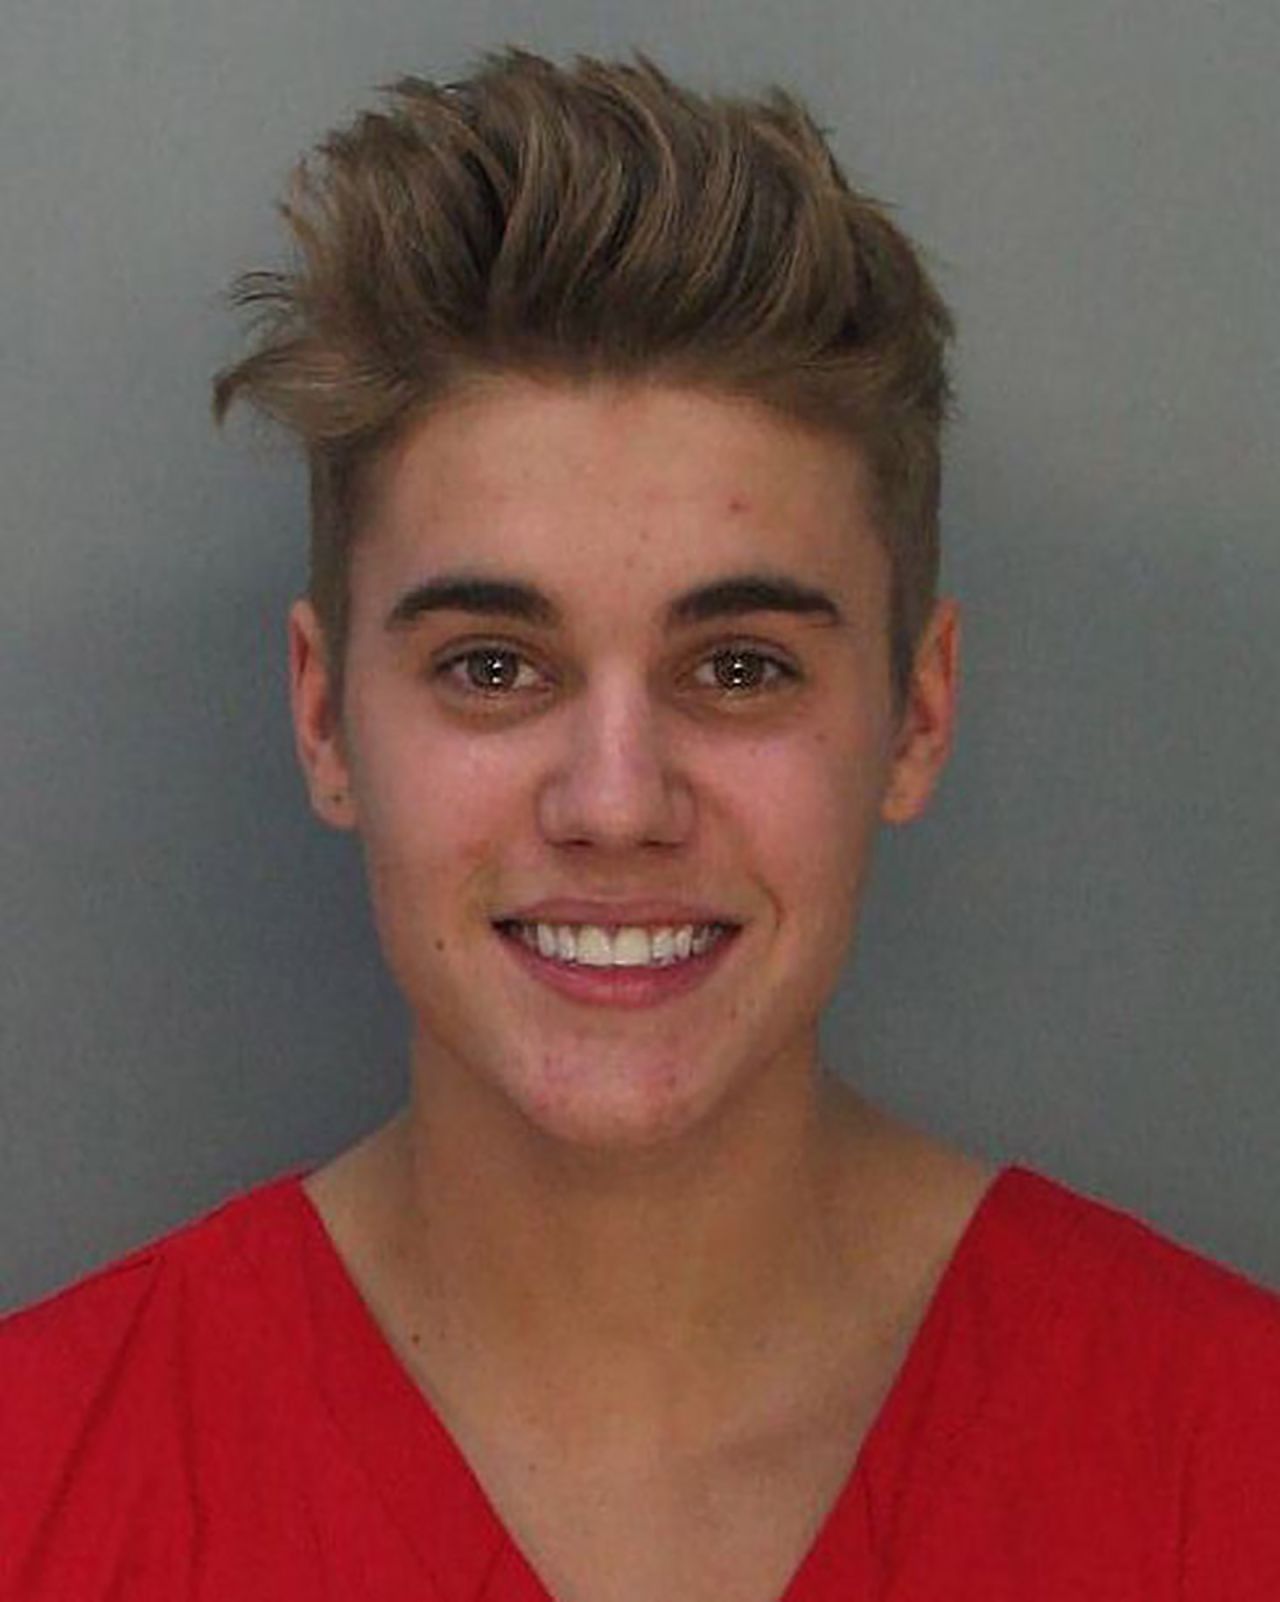 On January 23, 2014, <a href="https://www.cnn.com/2014/01/23/showbiz/justin-bieber-arrest/index.html" target="_blank">Bieber was charged</a> with drunken driving, resisting arrest and driving without a valid license after Miami Beach police say they saw the pop star street racing. Bieber later pleaded guilty to careless driving and resisting arrest. The plea agreement included a charitable donation and an anger management course.